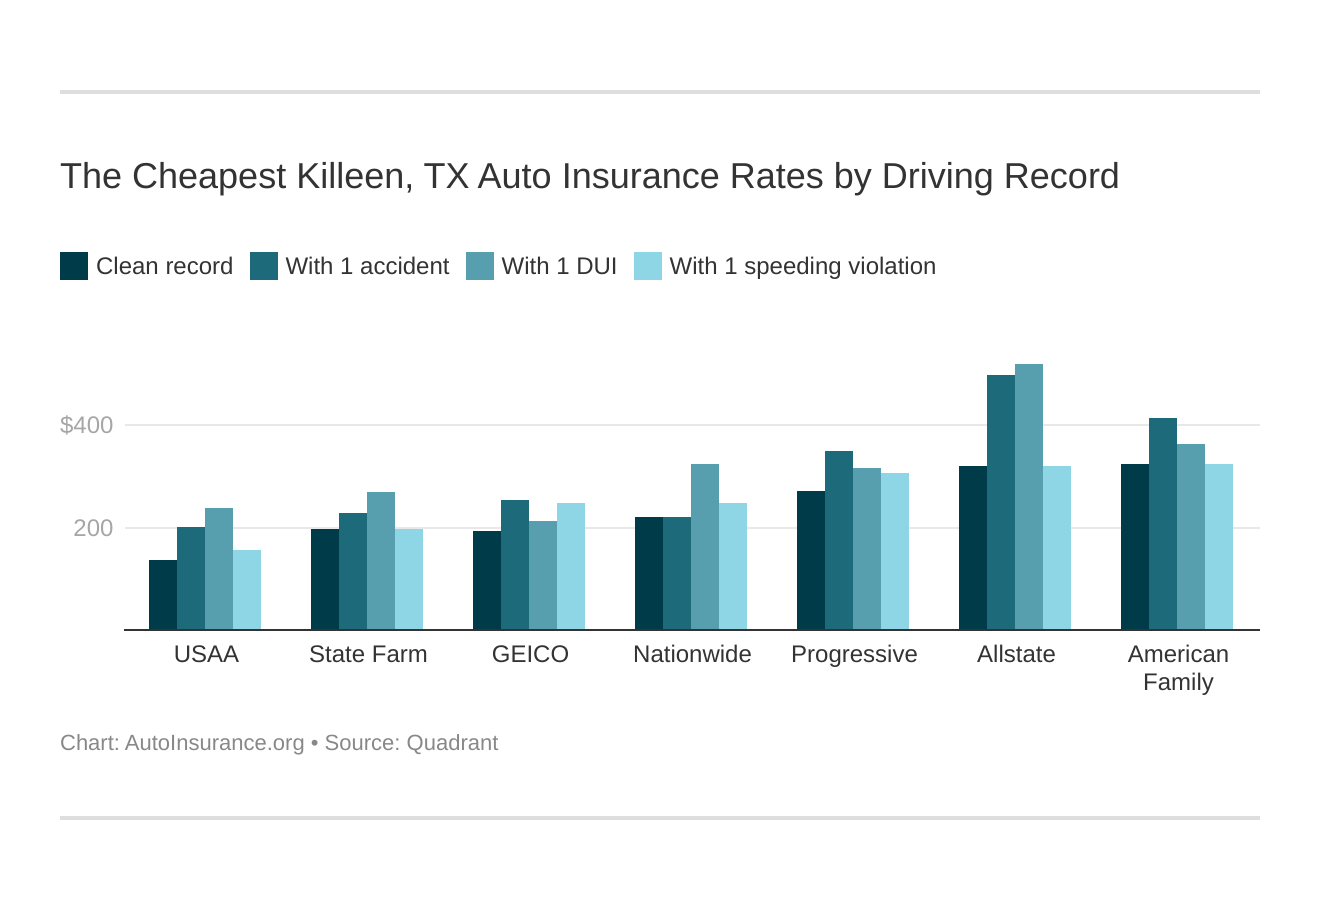 The Cheapest Killeen, TX Auto Insurance Rates by Driving Record